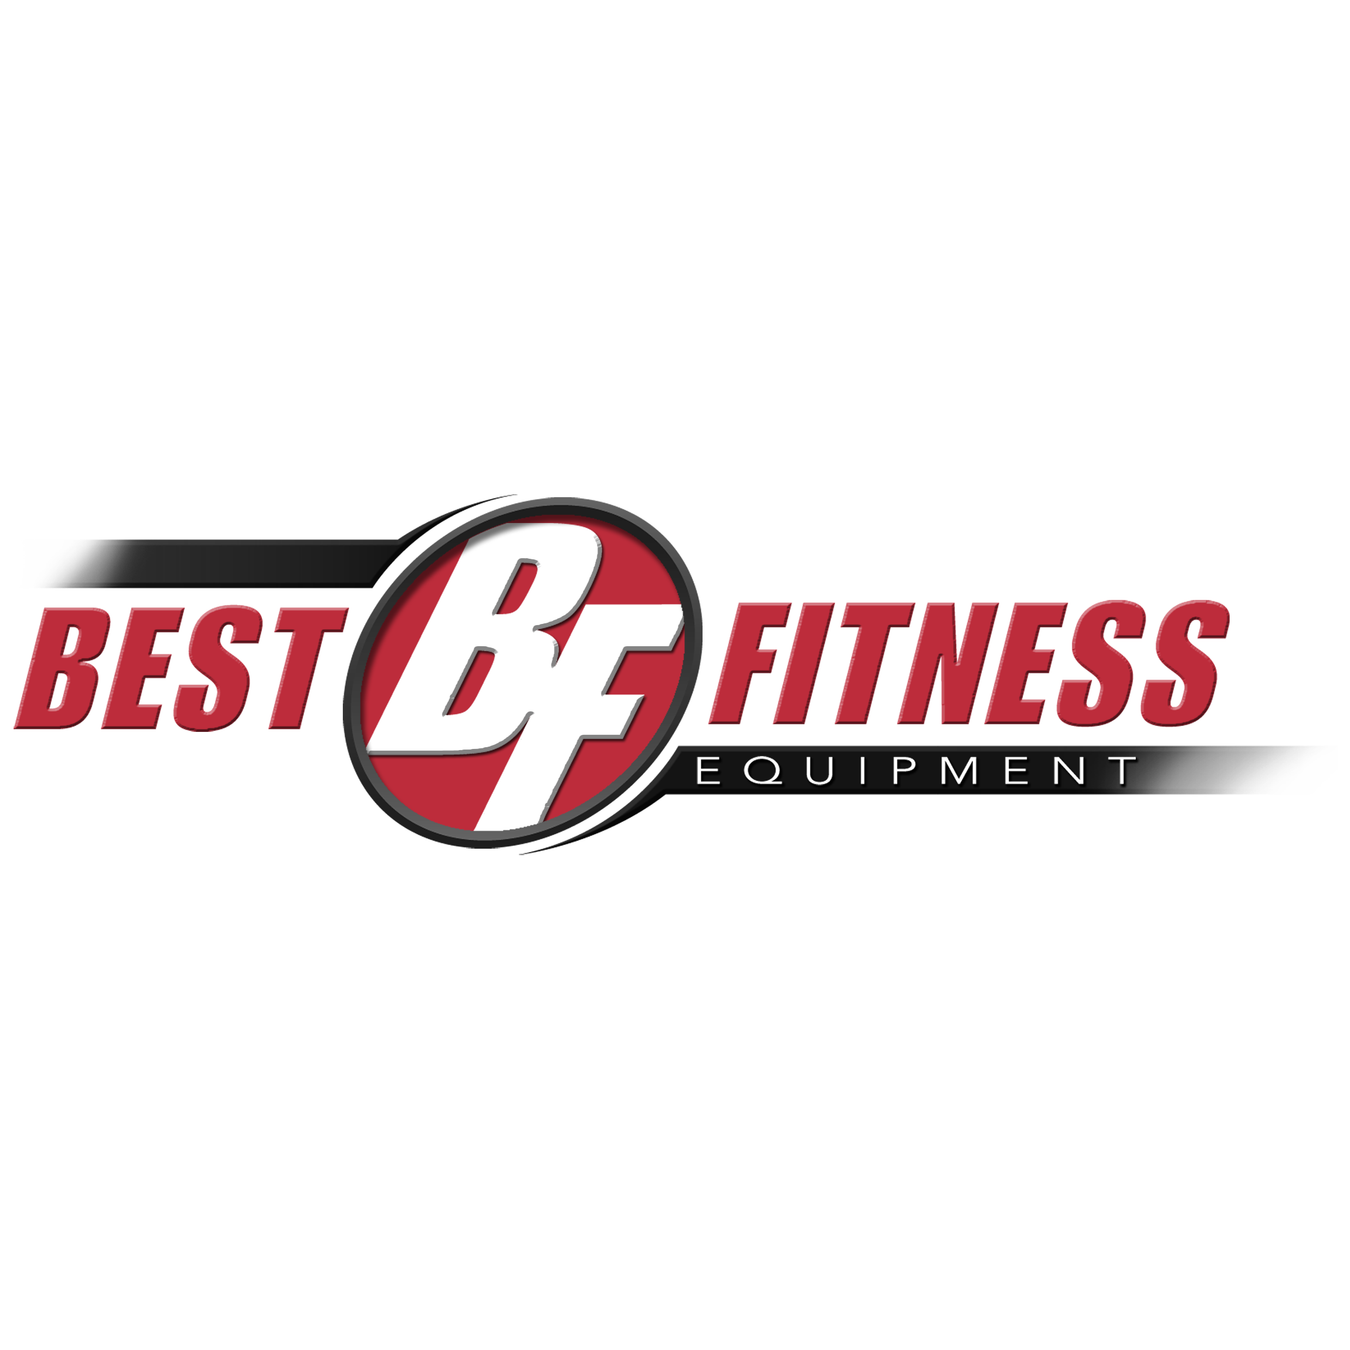 Best Fitness Equipment by Body Solid